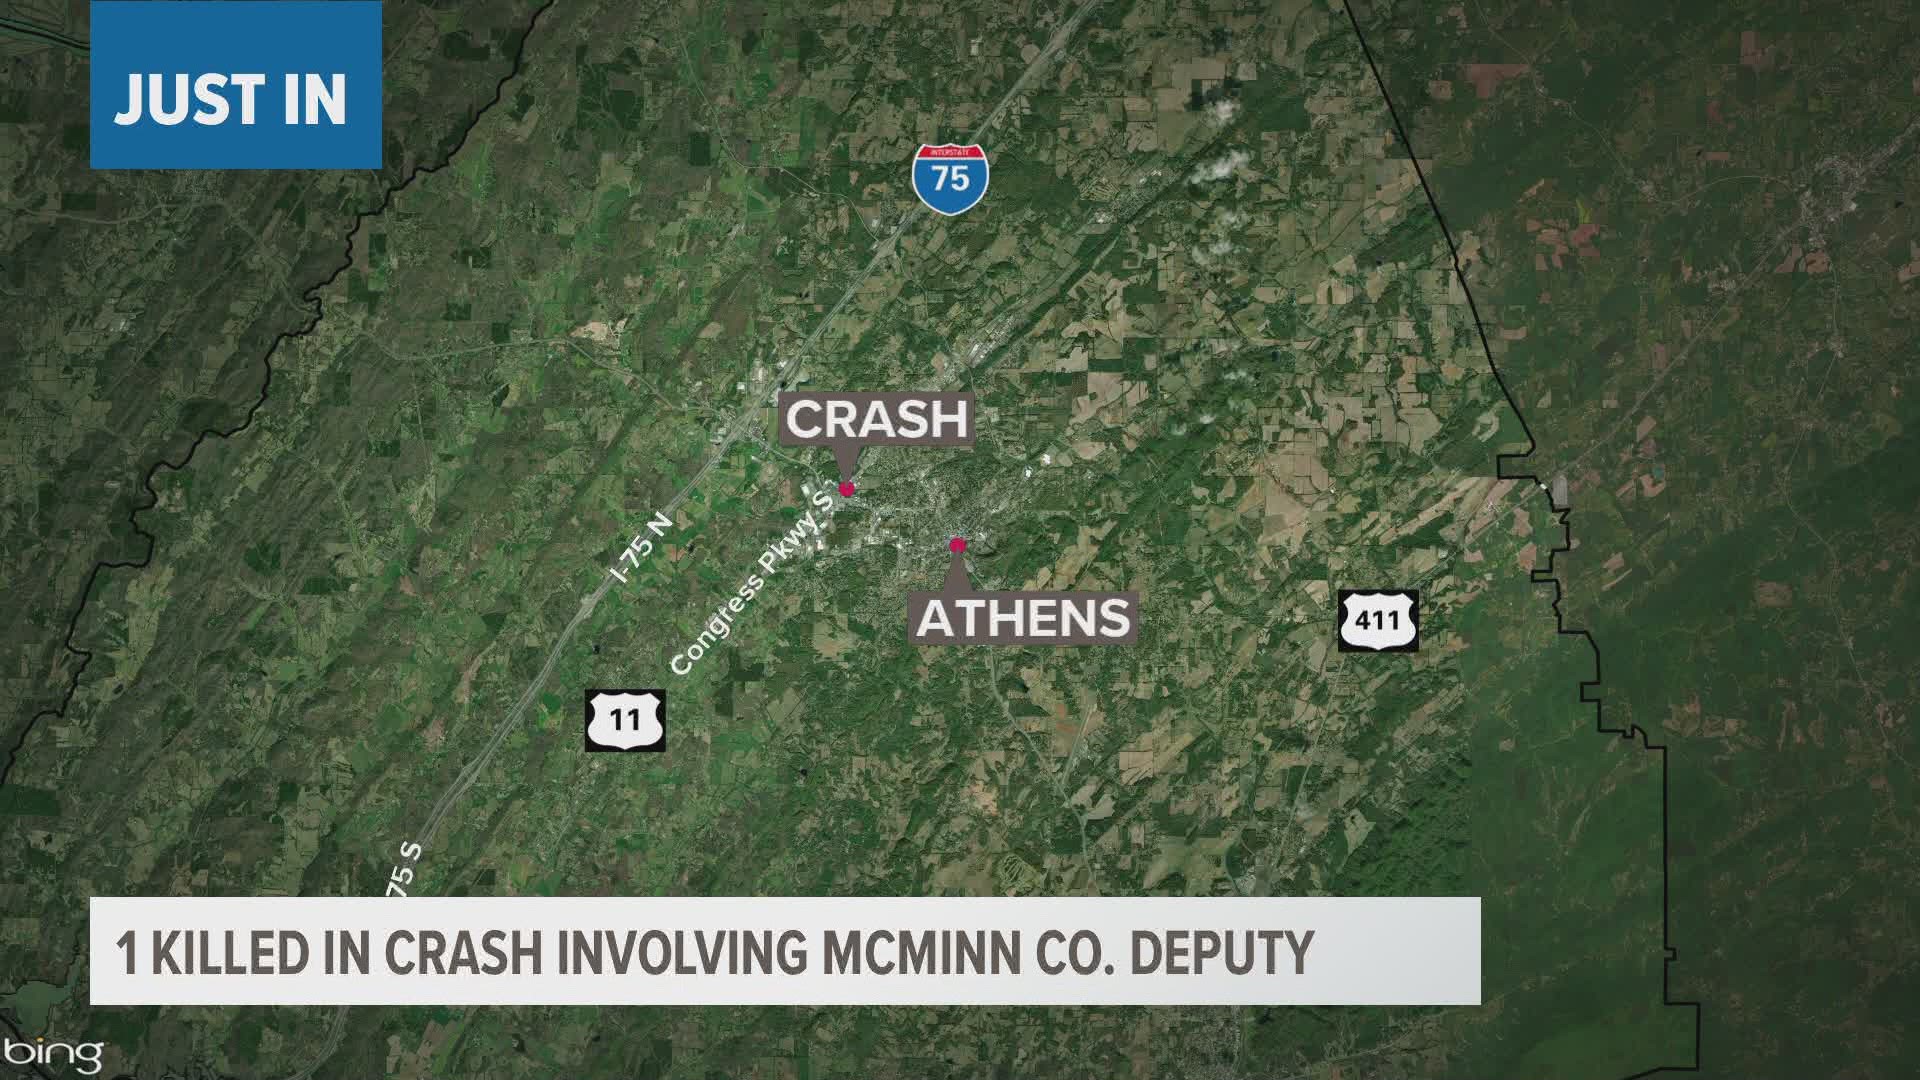 The McMinn Co. Sheriff said a passenger died in a crash with a deputy's patrol vehicle on Wednesday.